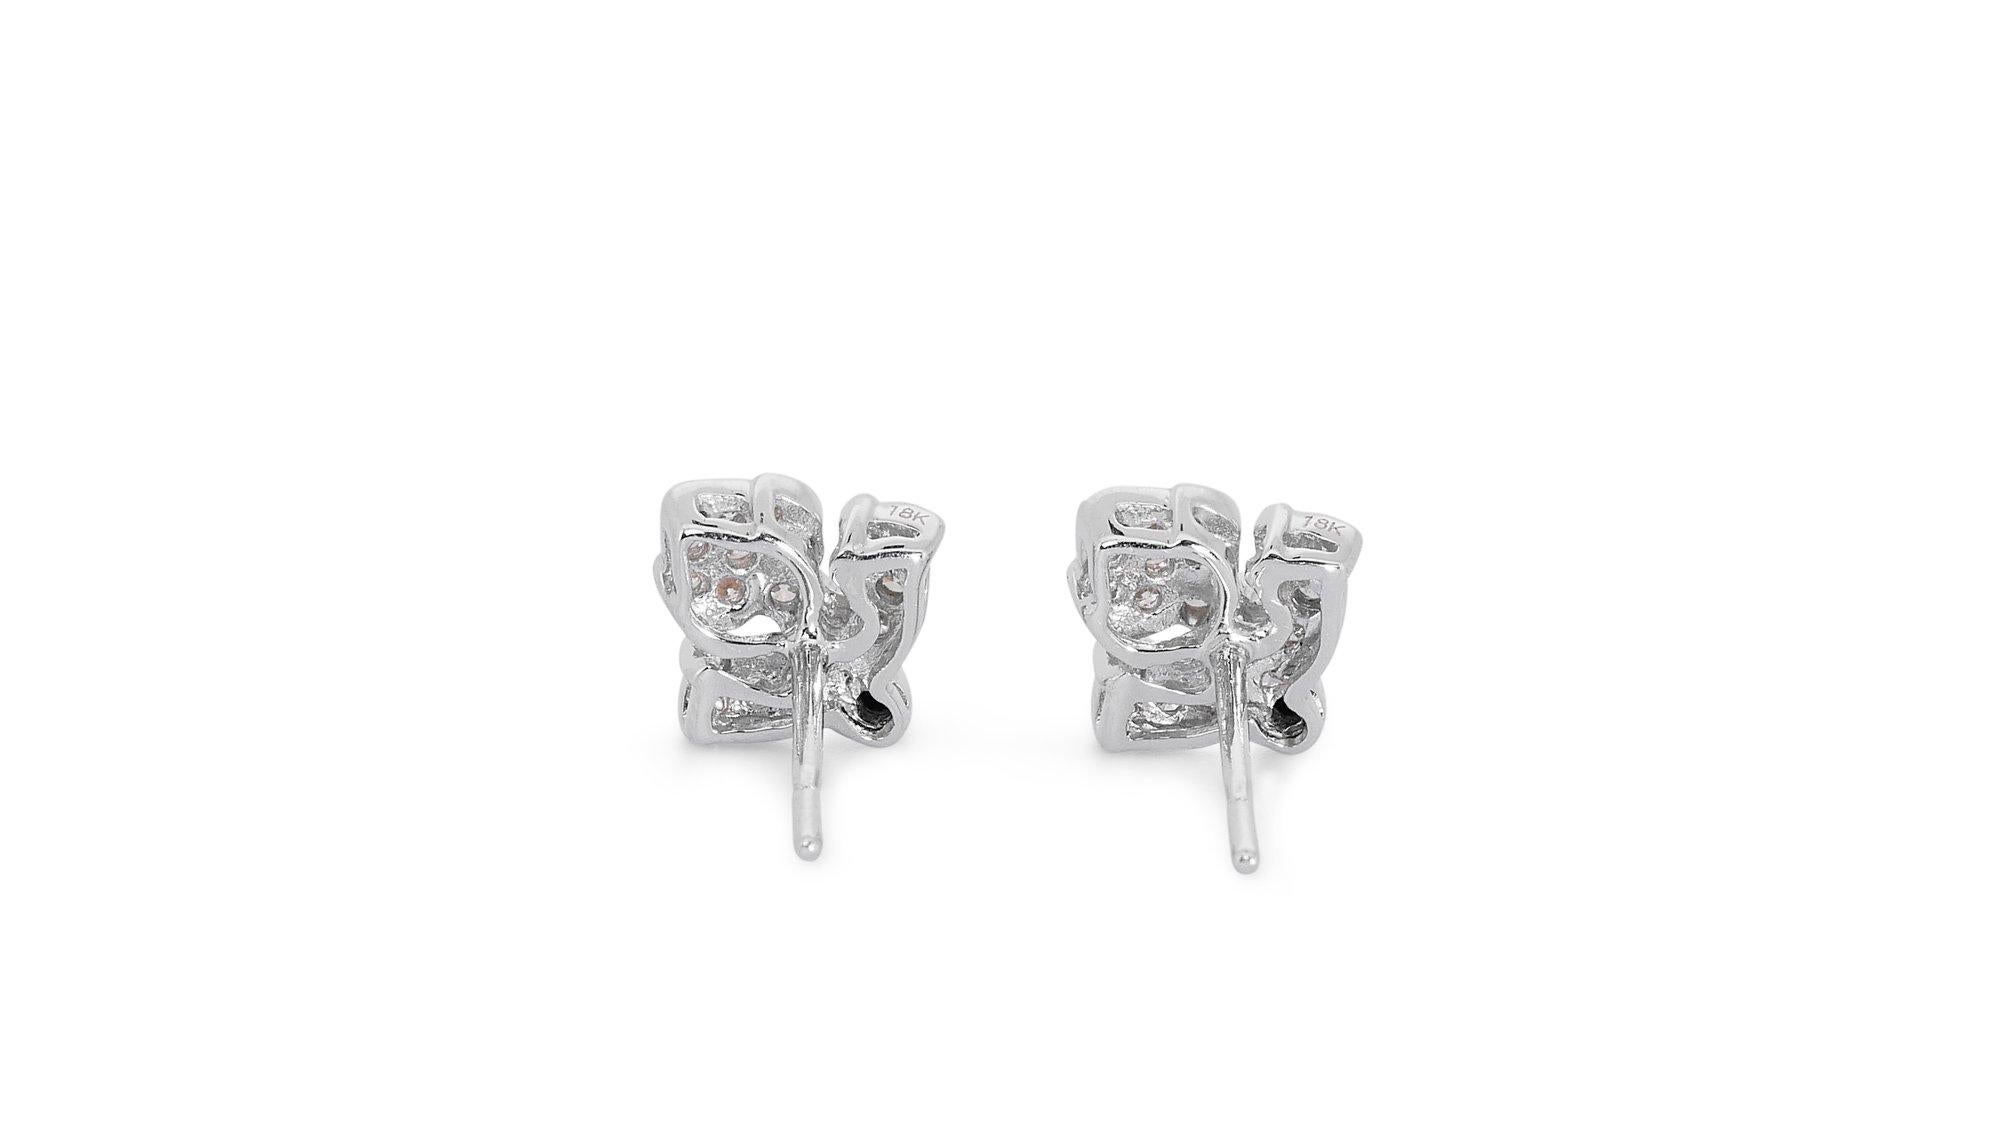 Dazzling 18k White Gold Stud Earrings W/ 0.88 Ct Natural Diamonds Aig Cert For Sale 3